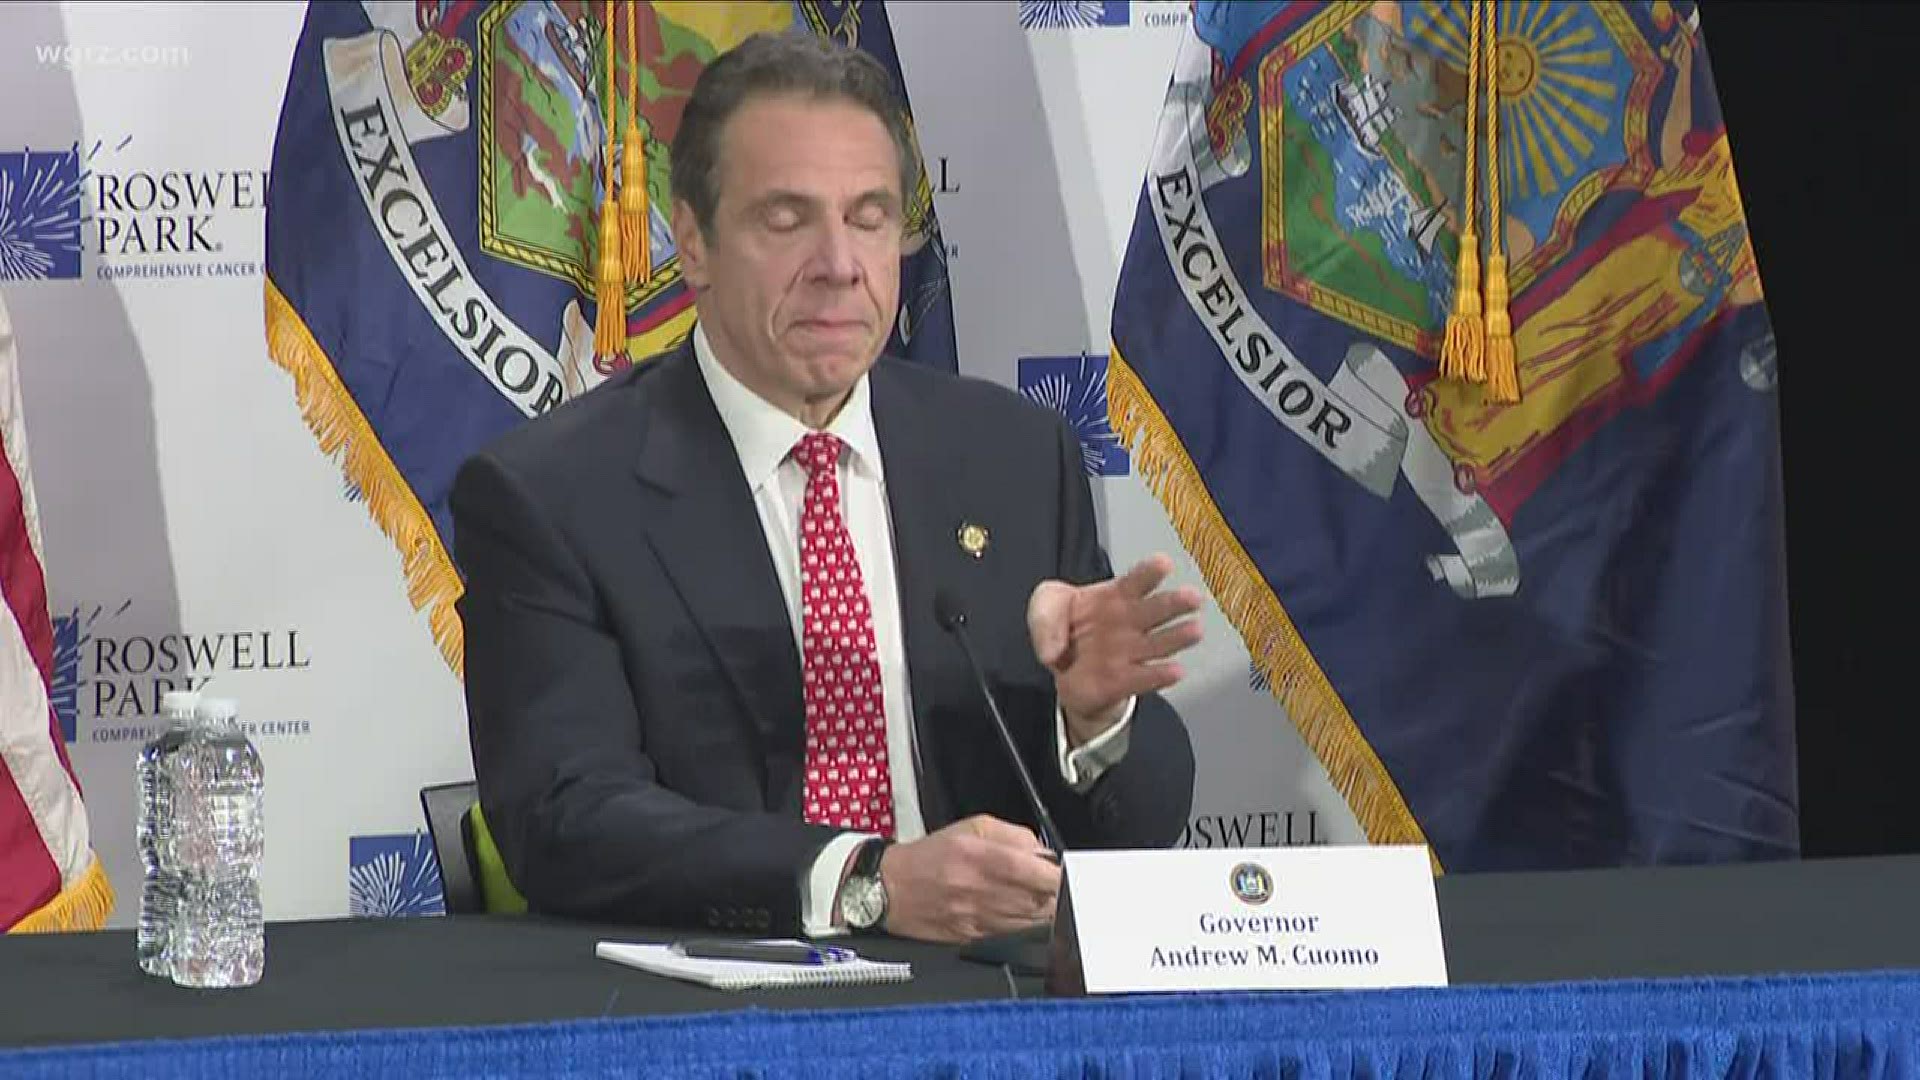 Governor Andrew Cuomo says the federal government has to assist the test-makers to get global supplies